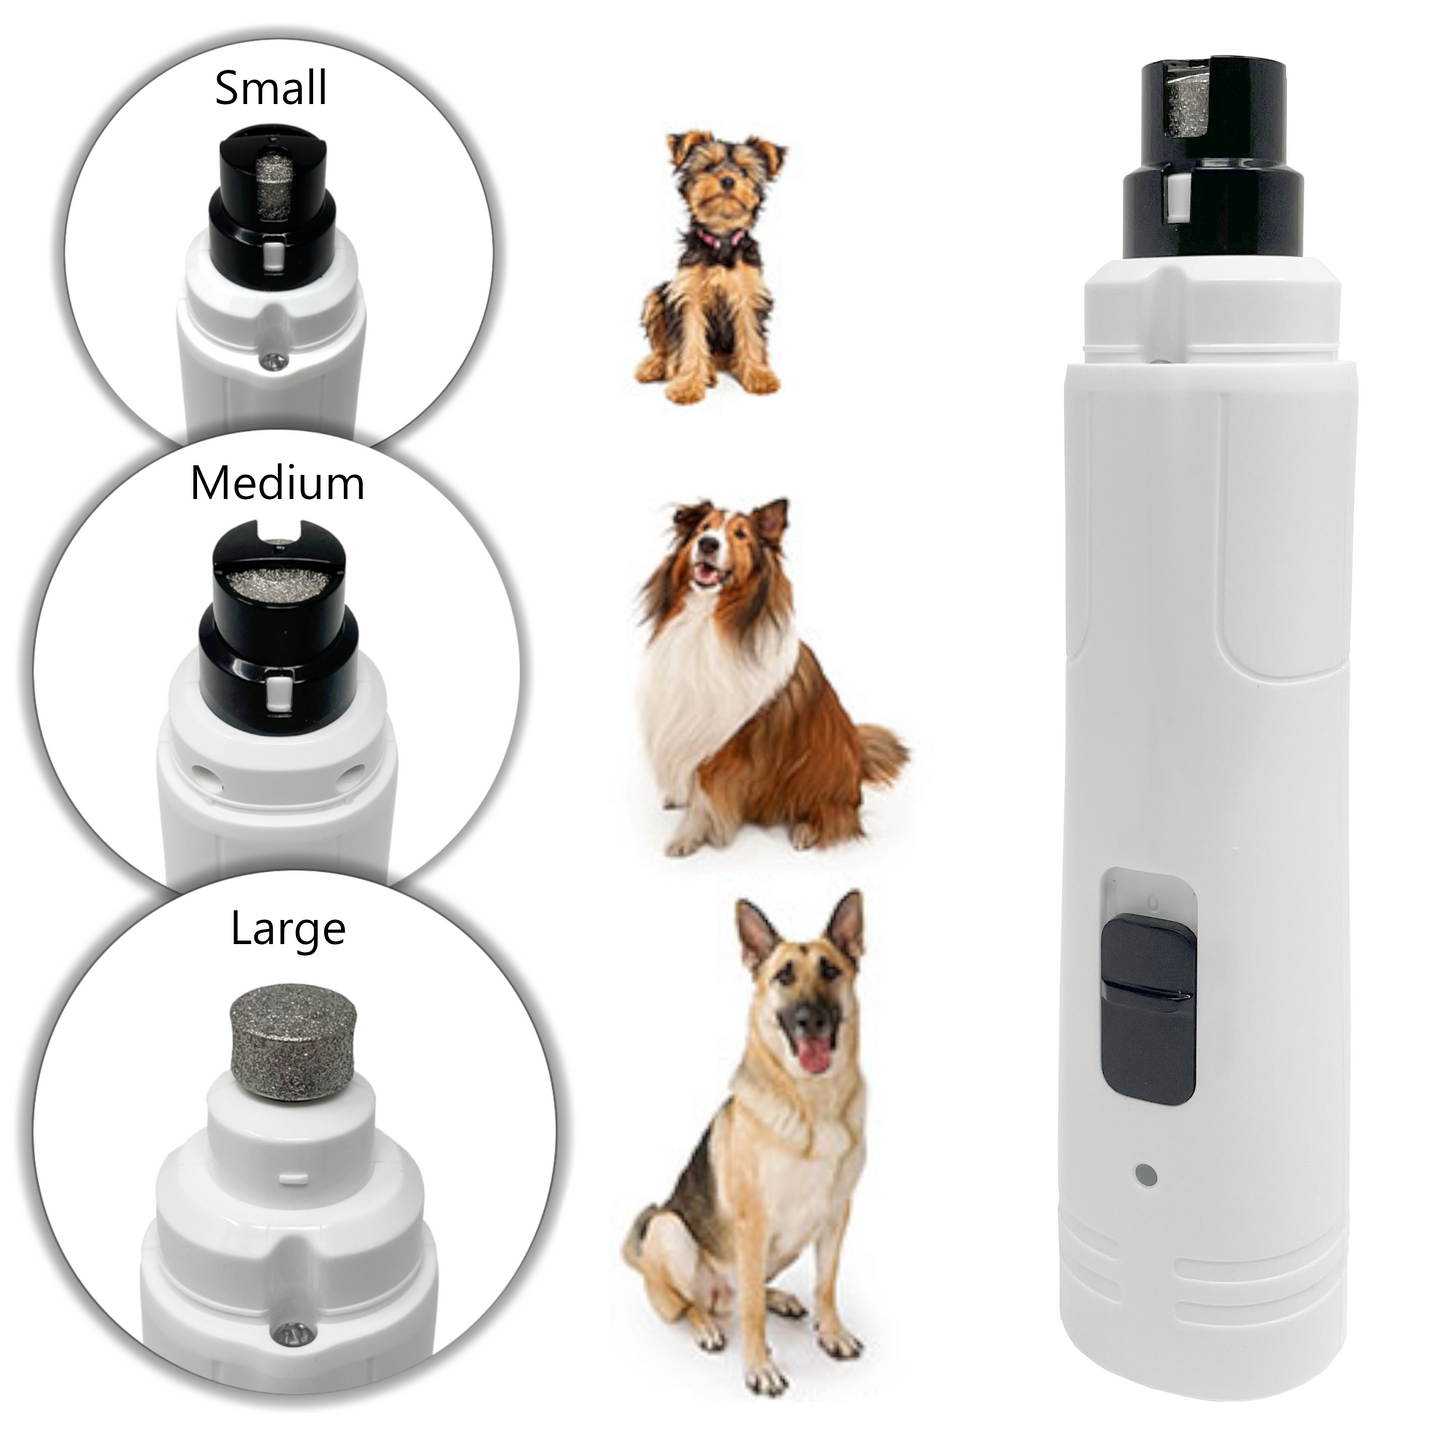 USB Rechargeable Professional 2-Speed Pet Nail Grinder with LED Light for Dogs and Cats